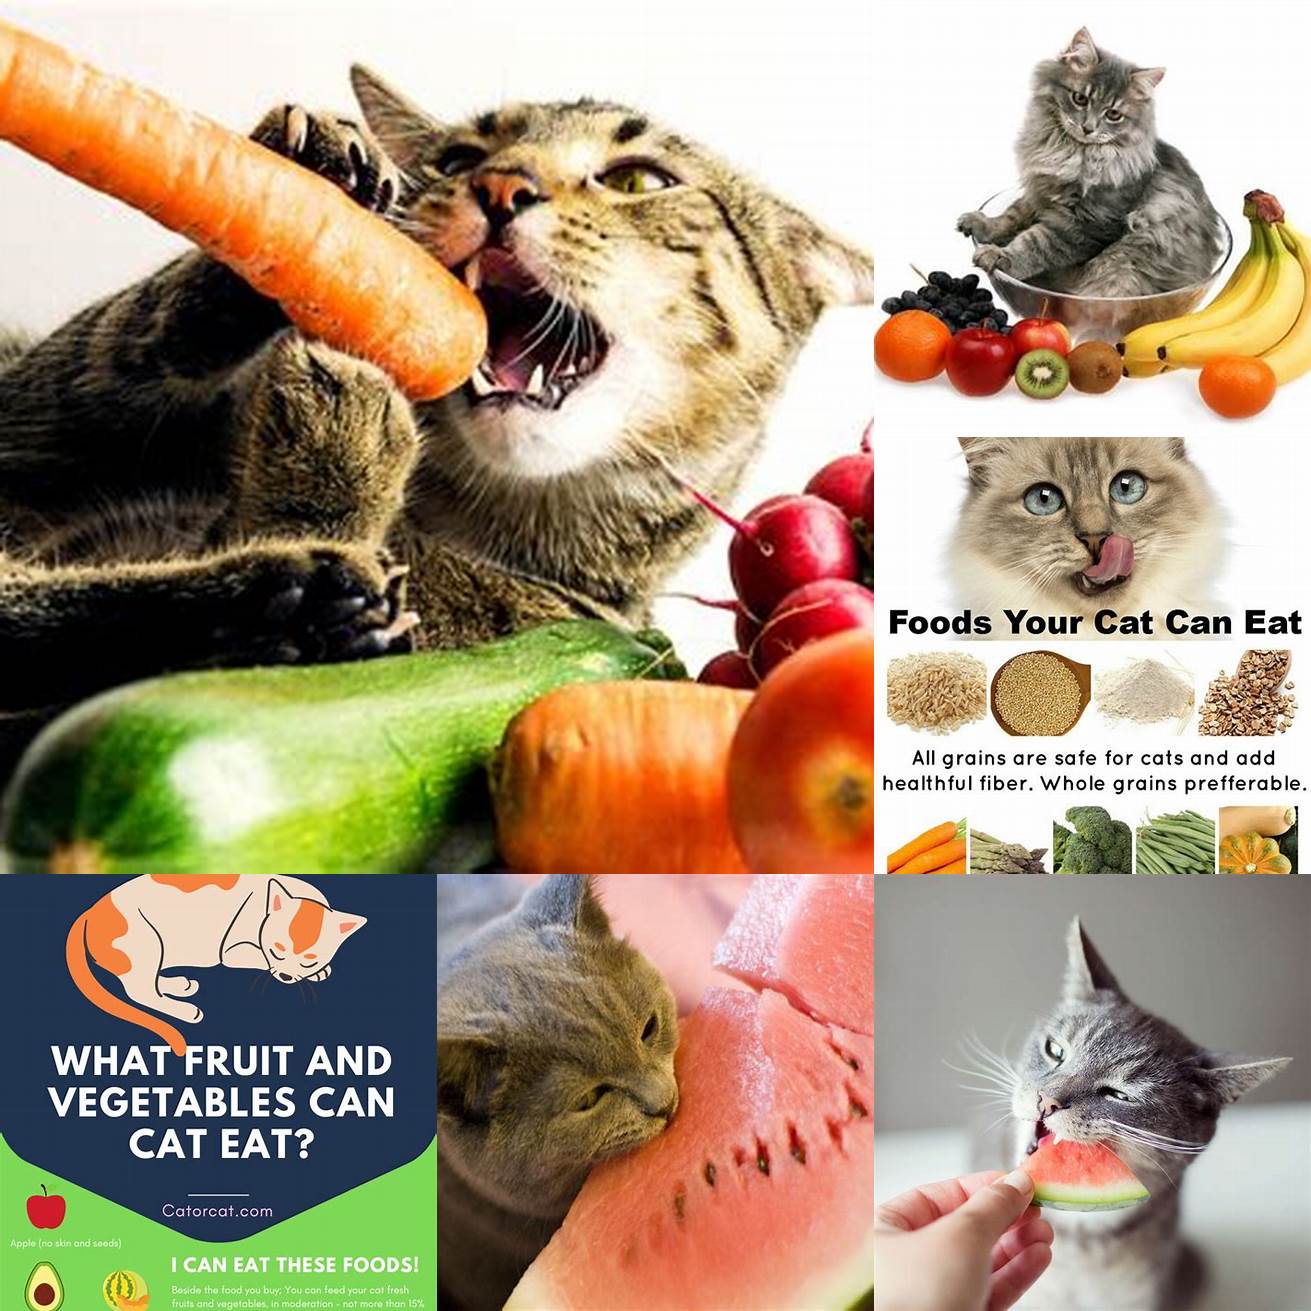 Q Can cats eat fruits and vegetables